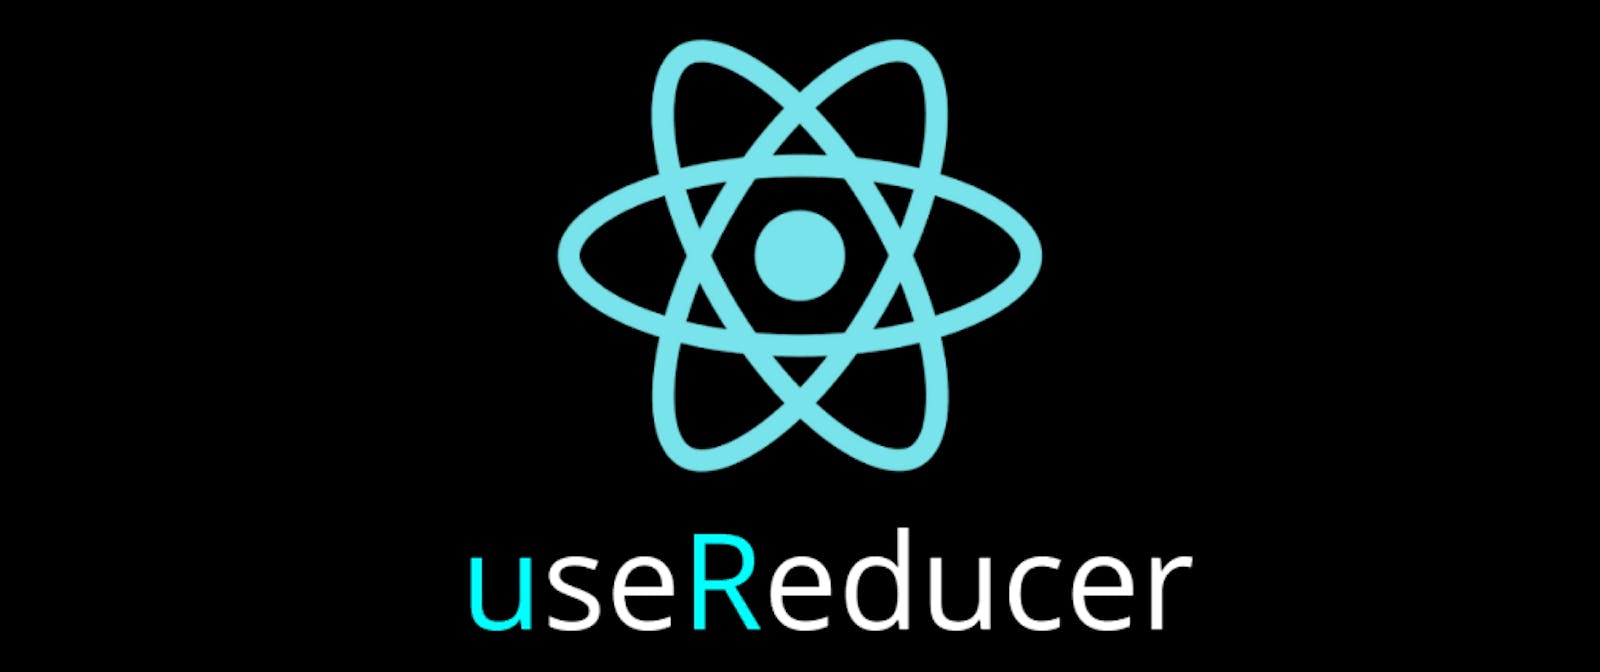 What the heck is useReducer()?